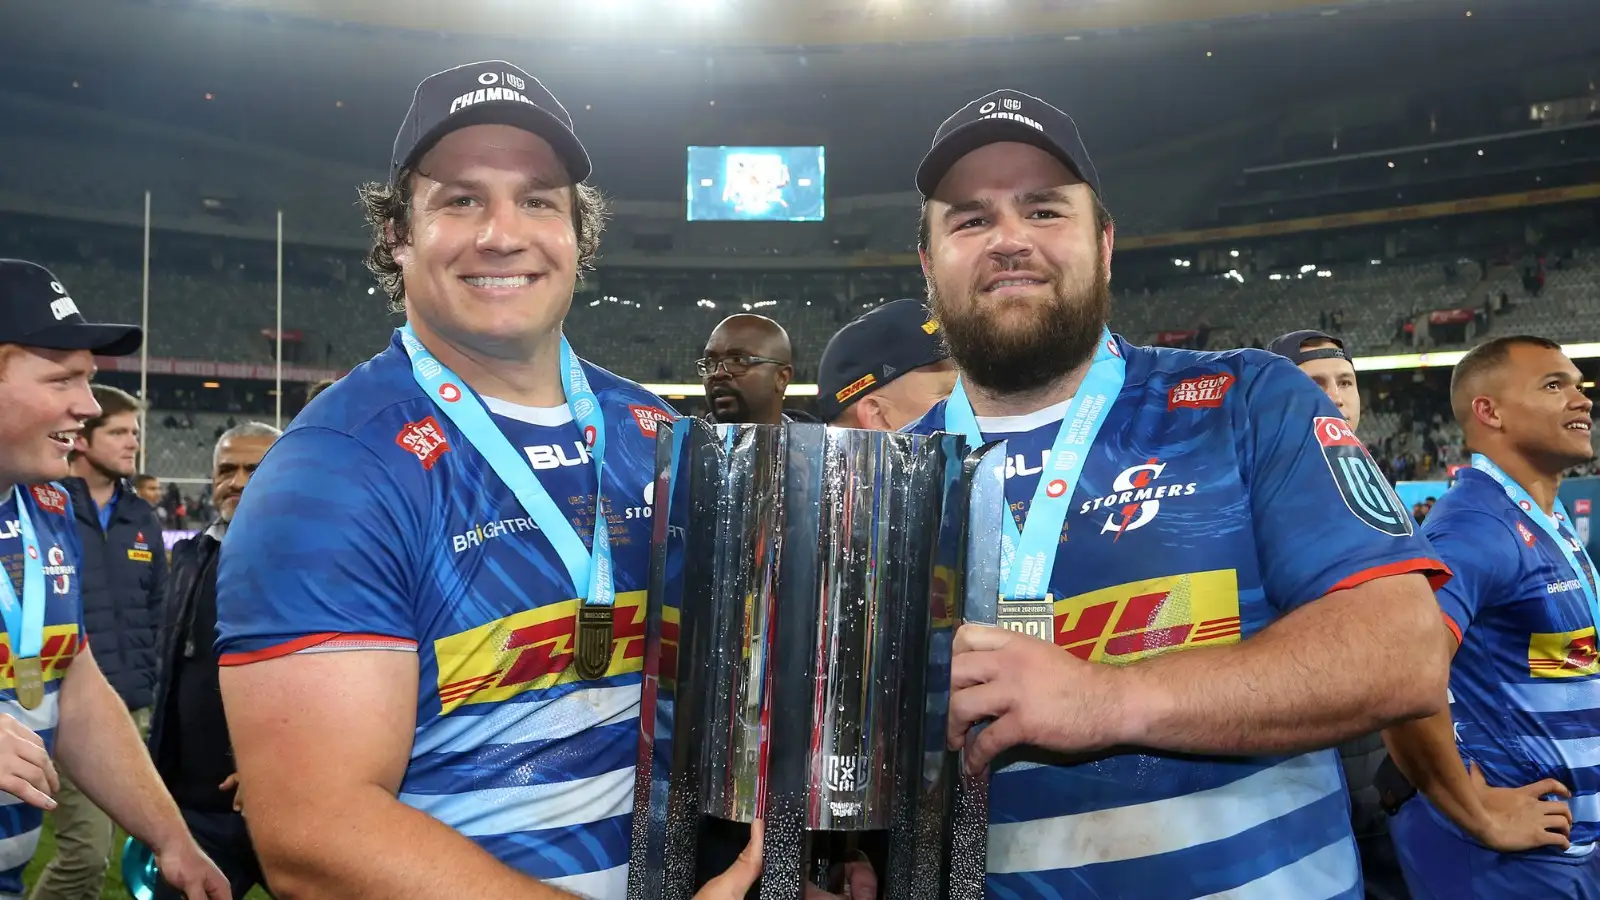 The Stormers have announced the contract extension of Springboks tighthead prop Frans Malherbe until 2026. Malherbe has only ever represented the Cape-based side throughout his professional career featuring in Super Rugby and the United Rugby Championship (URC) for the Stormers and Western Province in the Currie Cup.